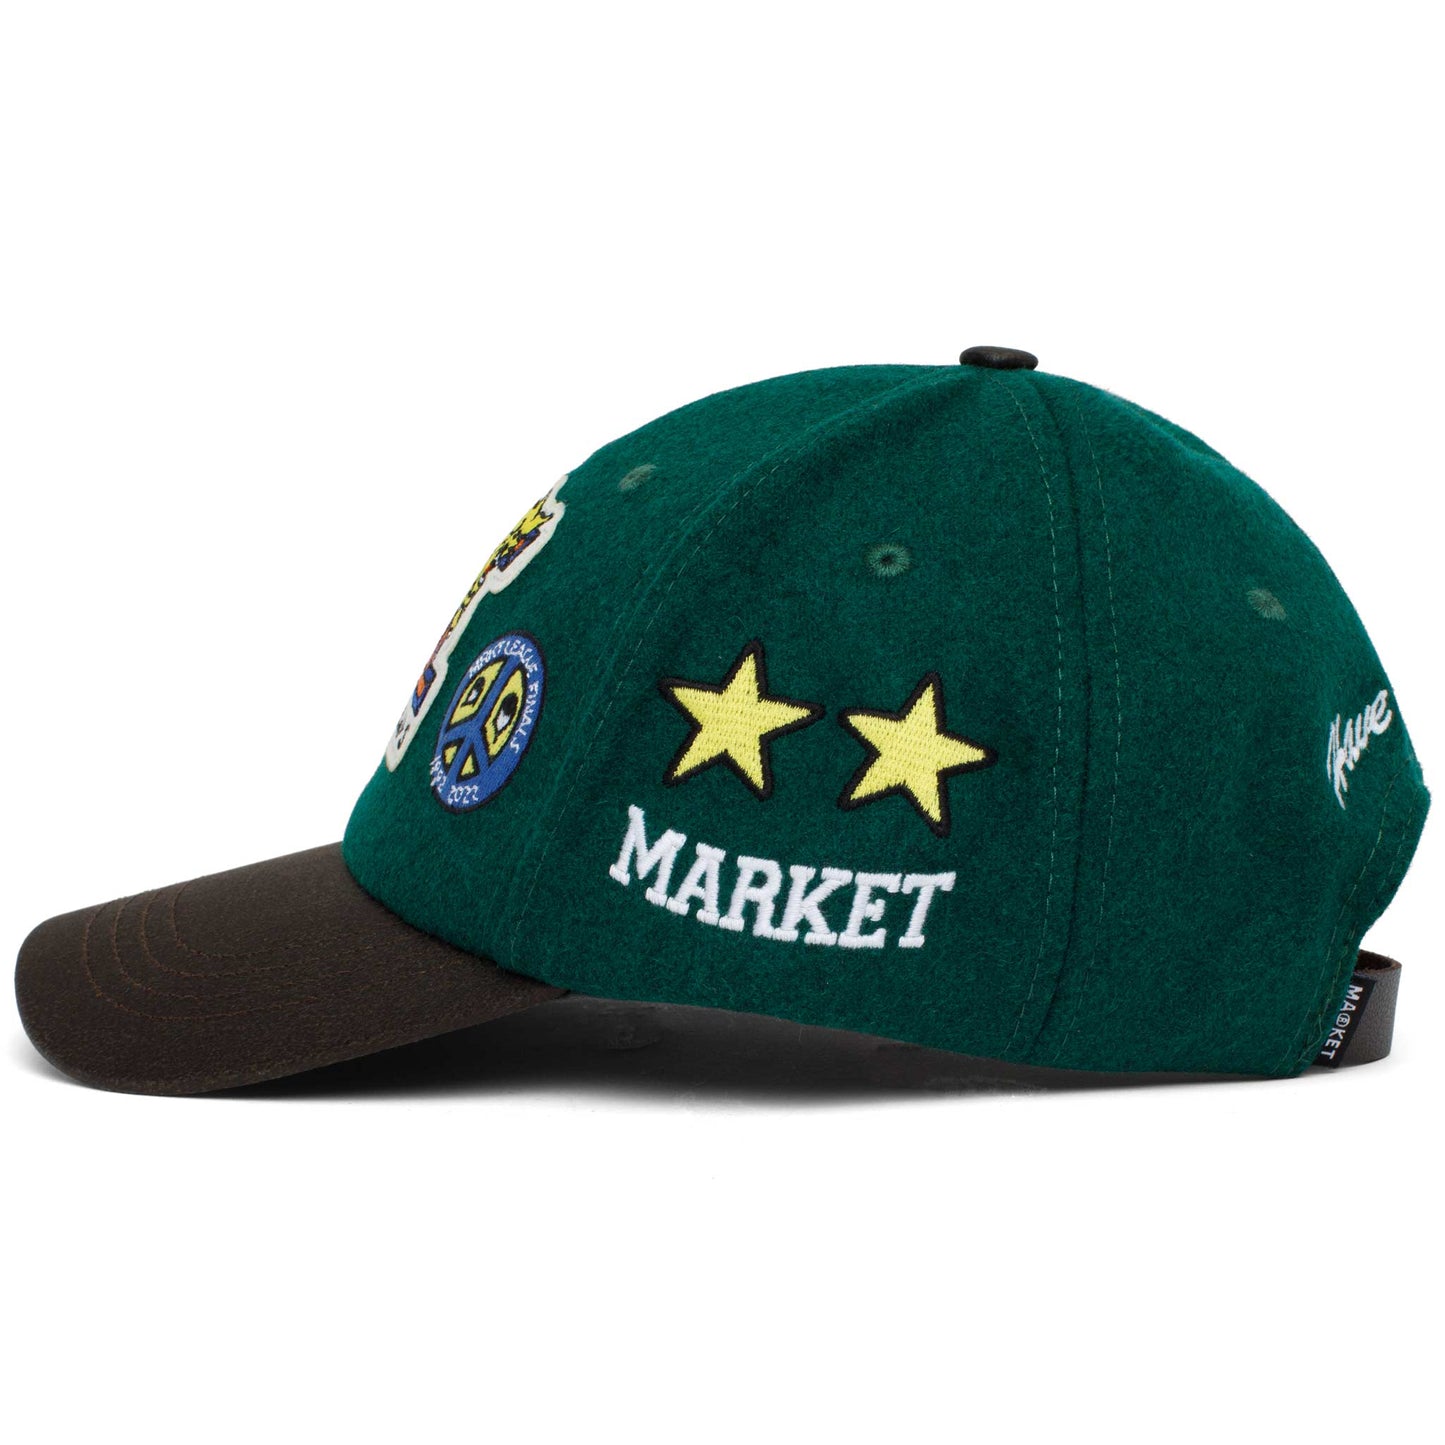 MARKET State Champs Hat